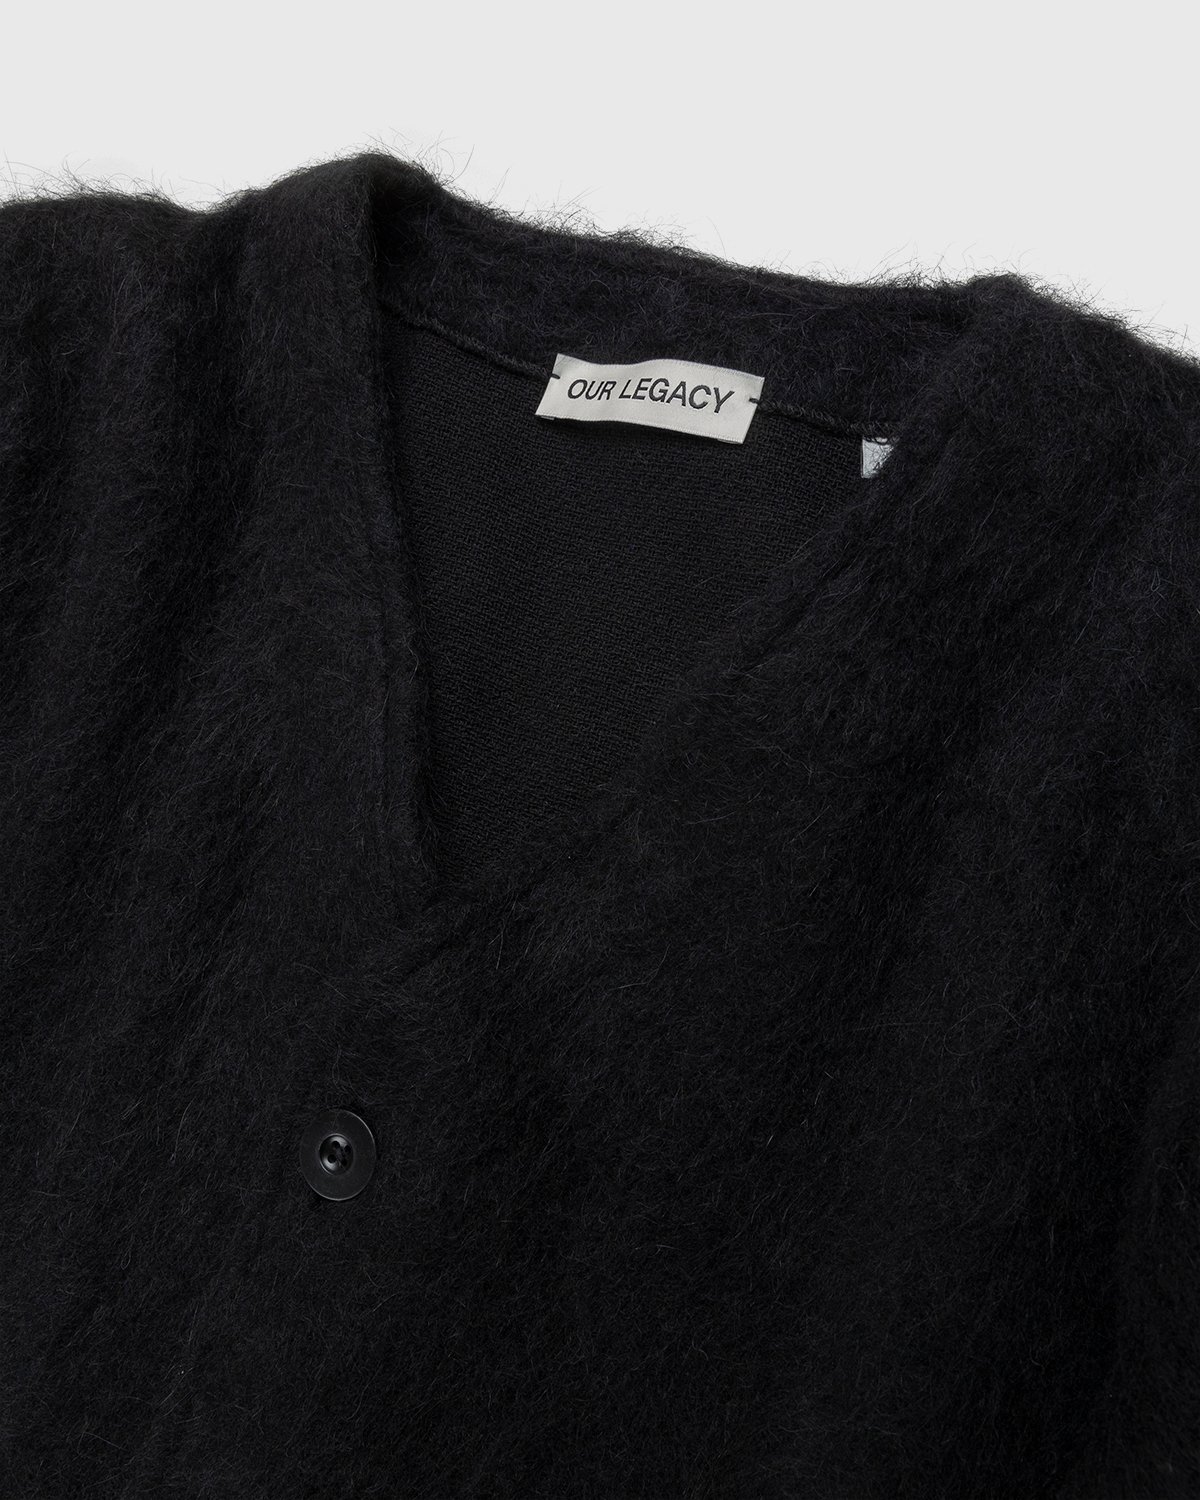 Our Legacy - Cardigan Black Mohair - Clothing - Black - Image 3